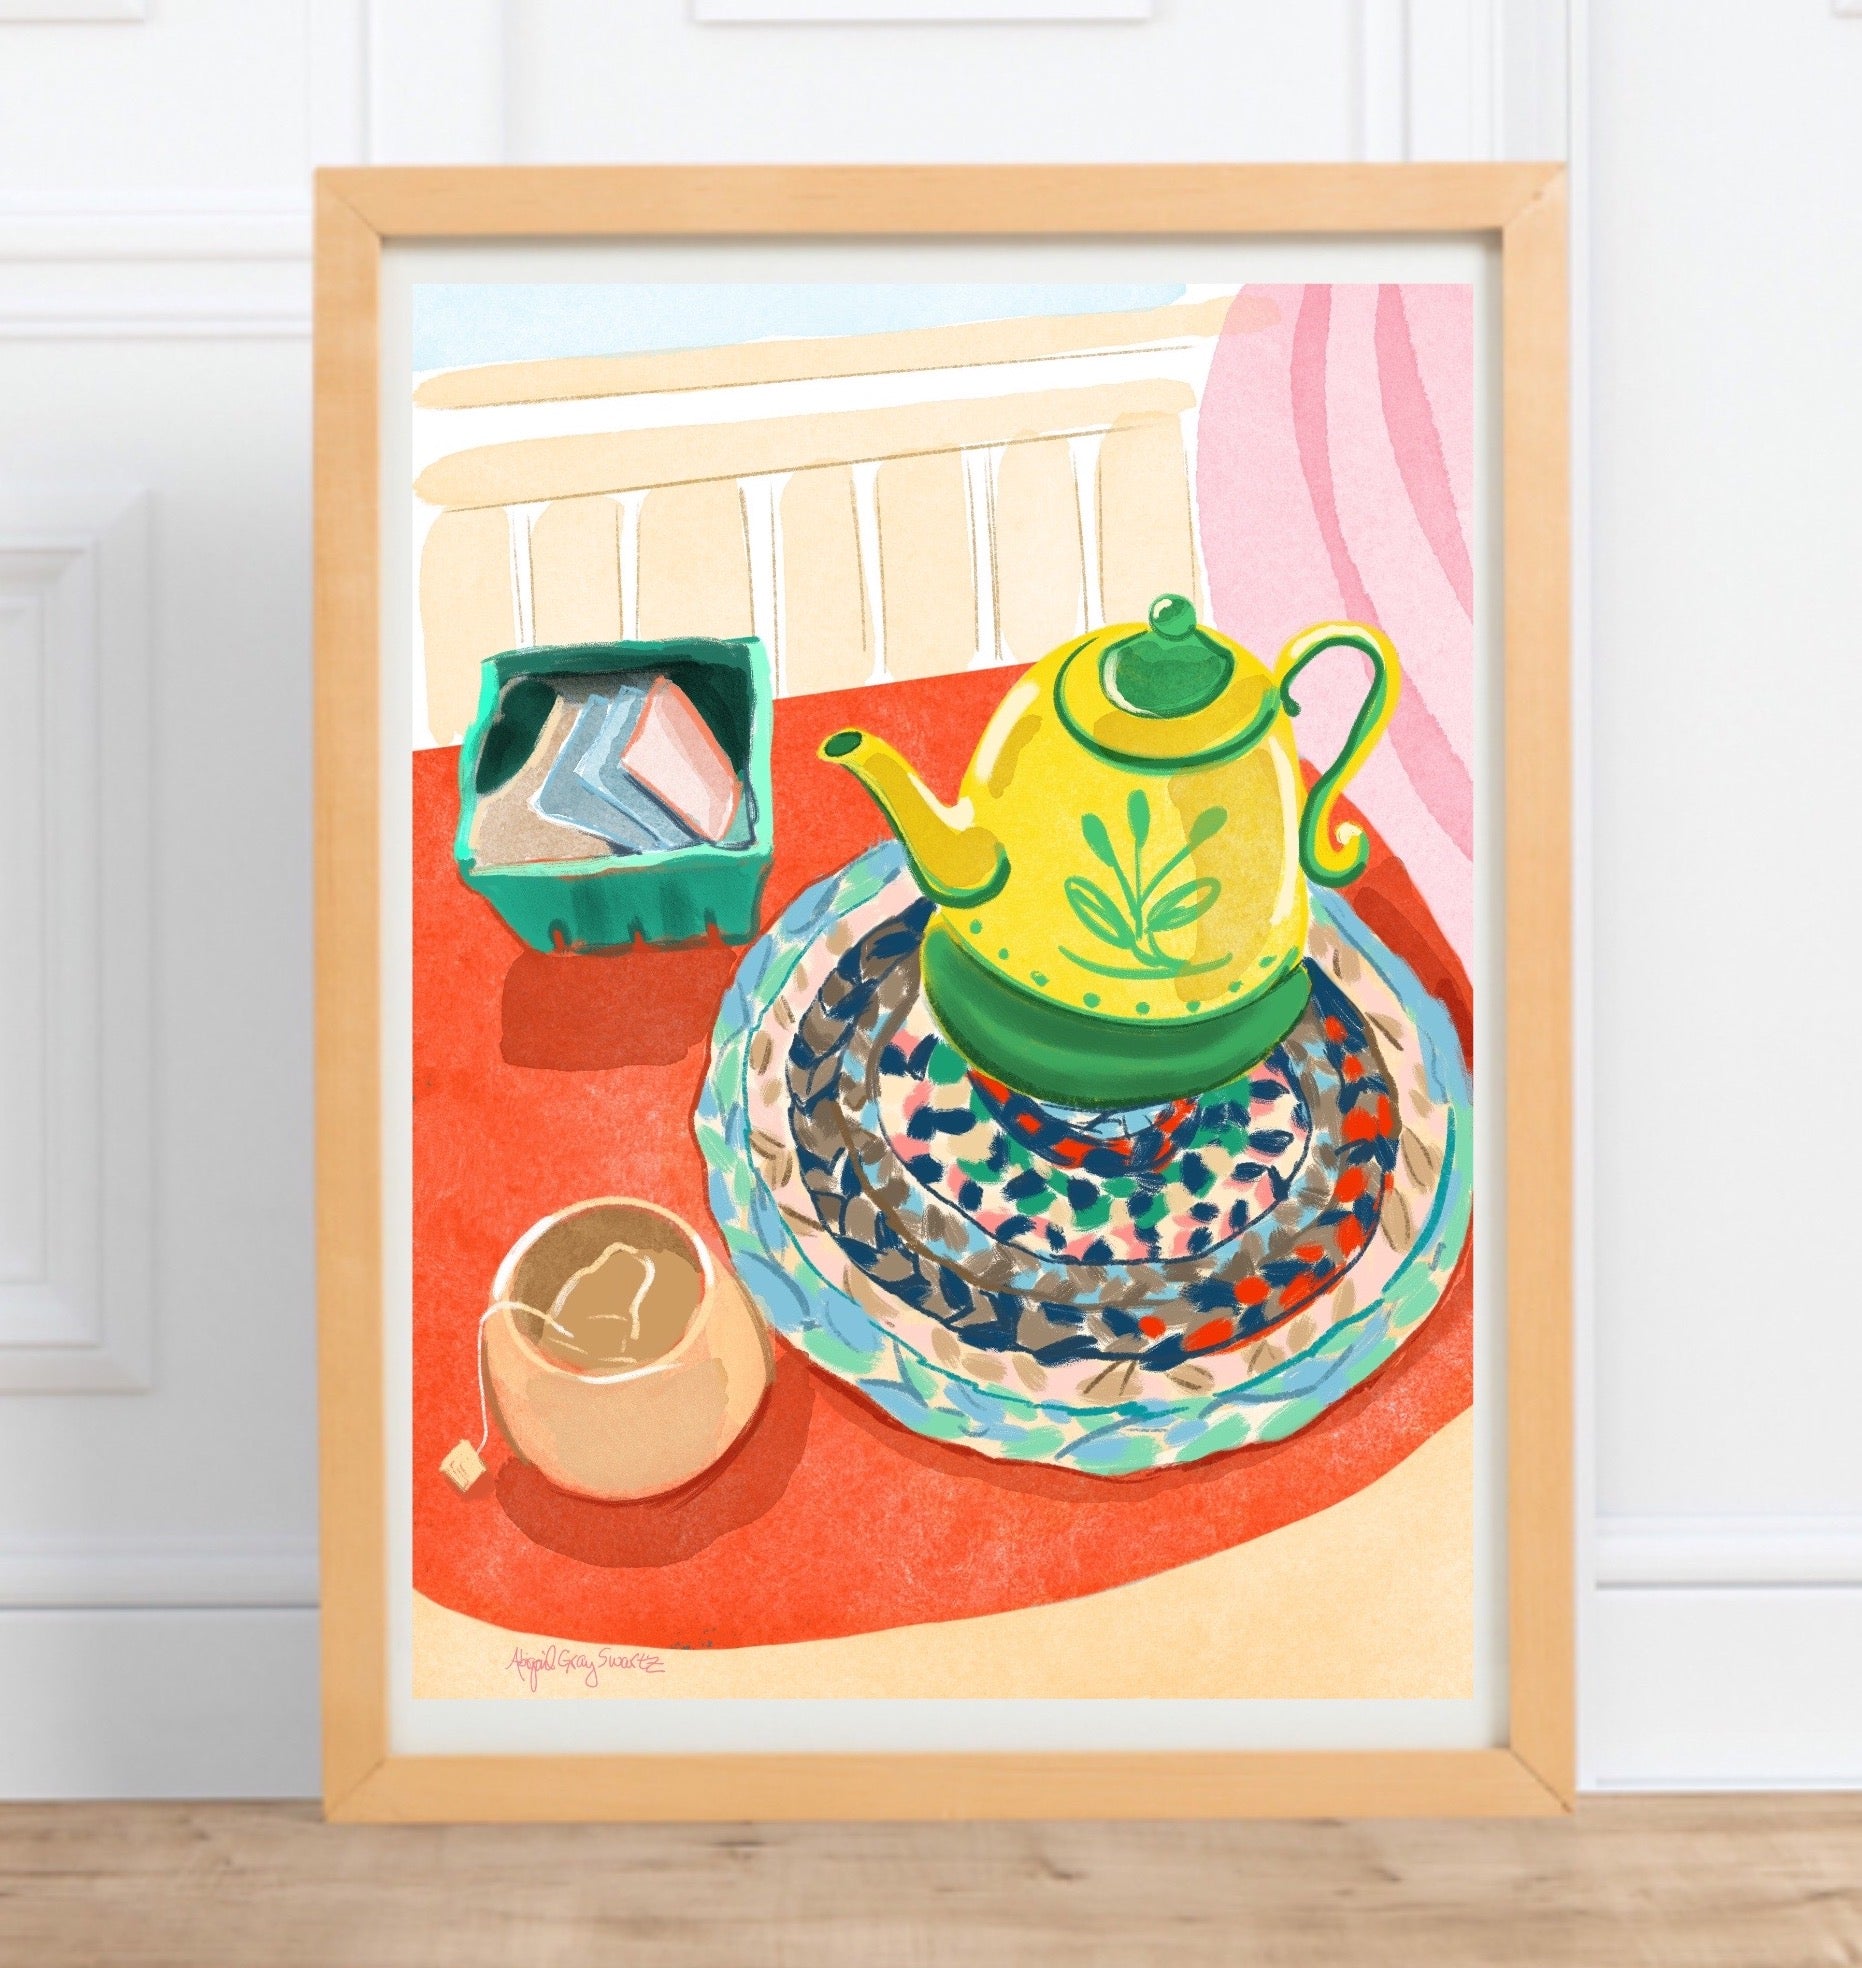 tea time art print features a tomatoe red table, with a yellow teapot, handwoven mat, tea bags and a steeping mug full of tea. colorful and vibrant art.